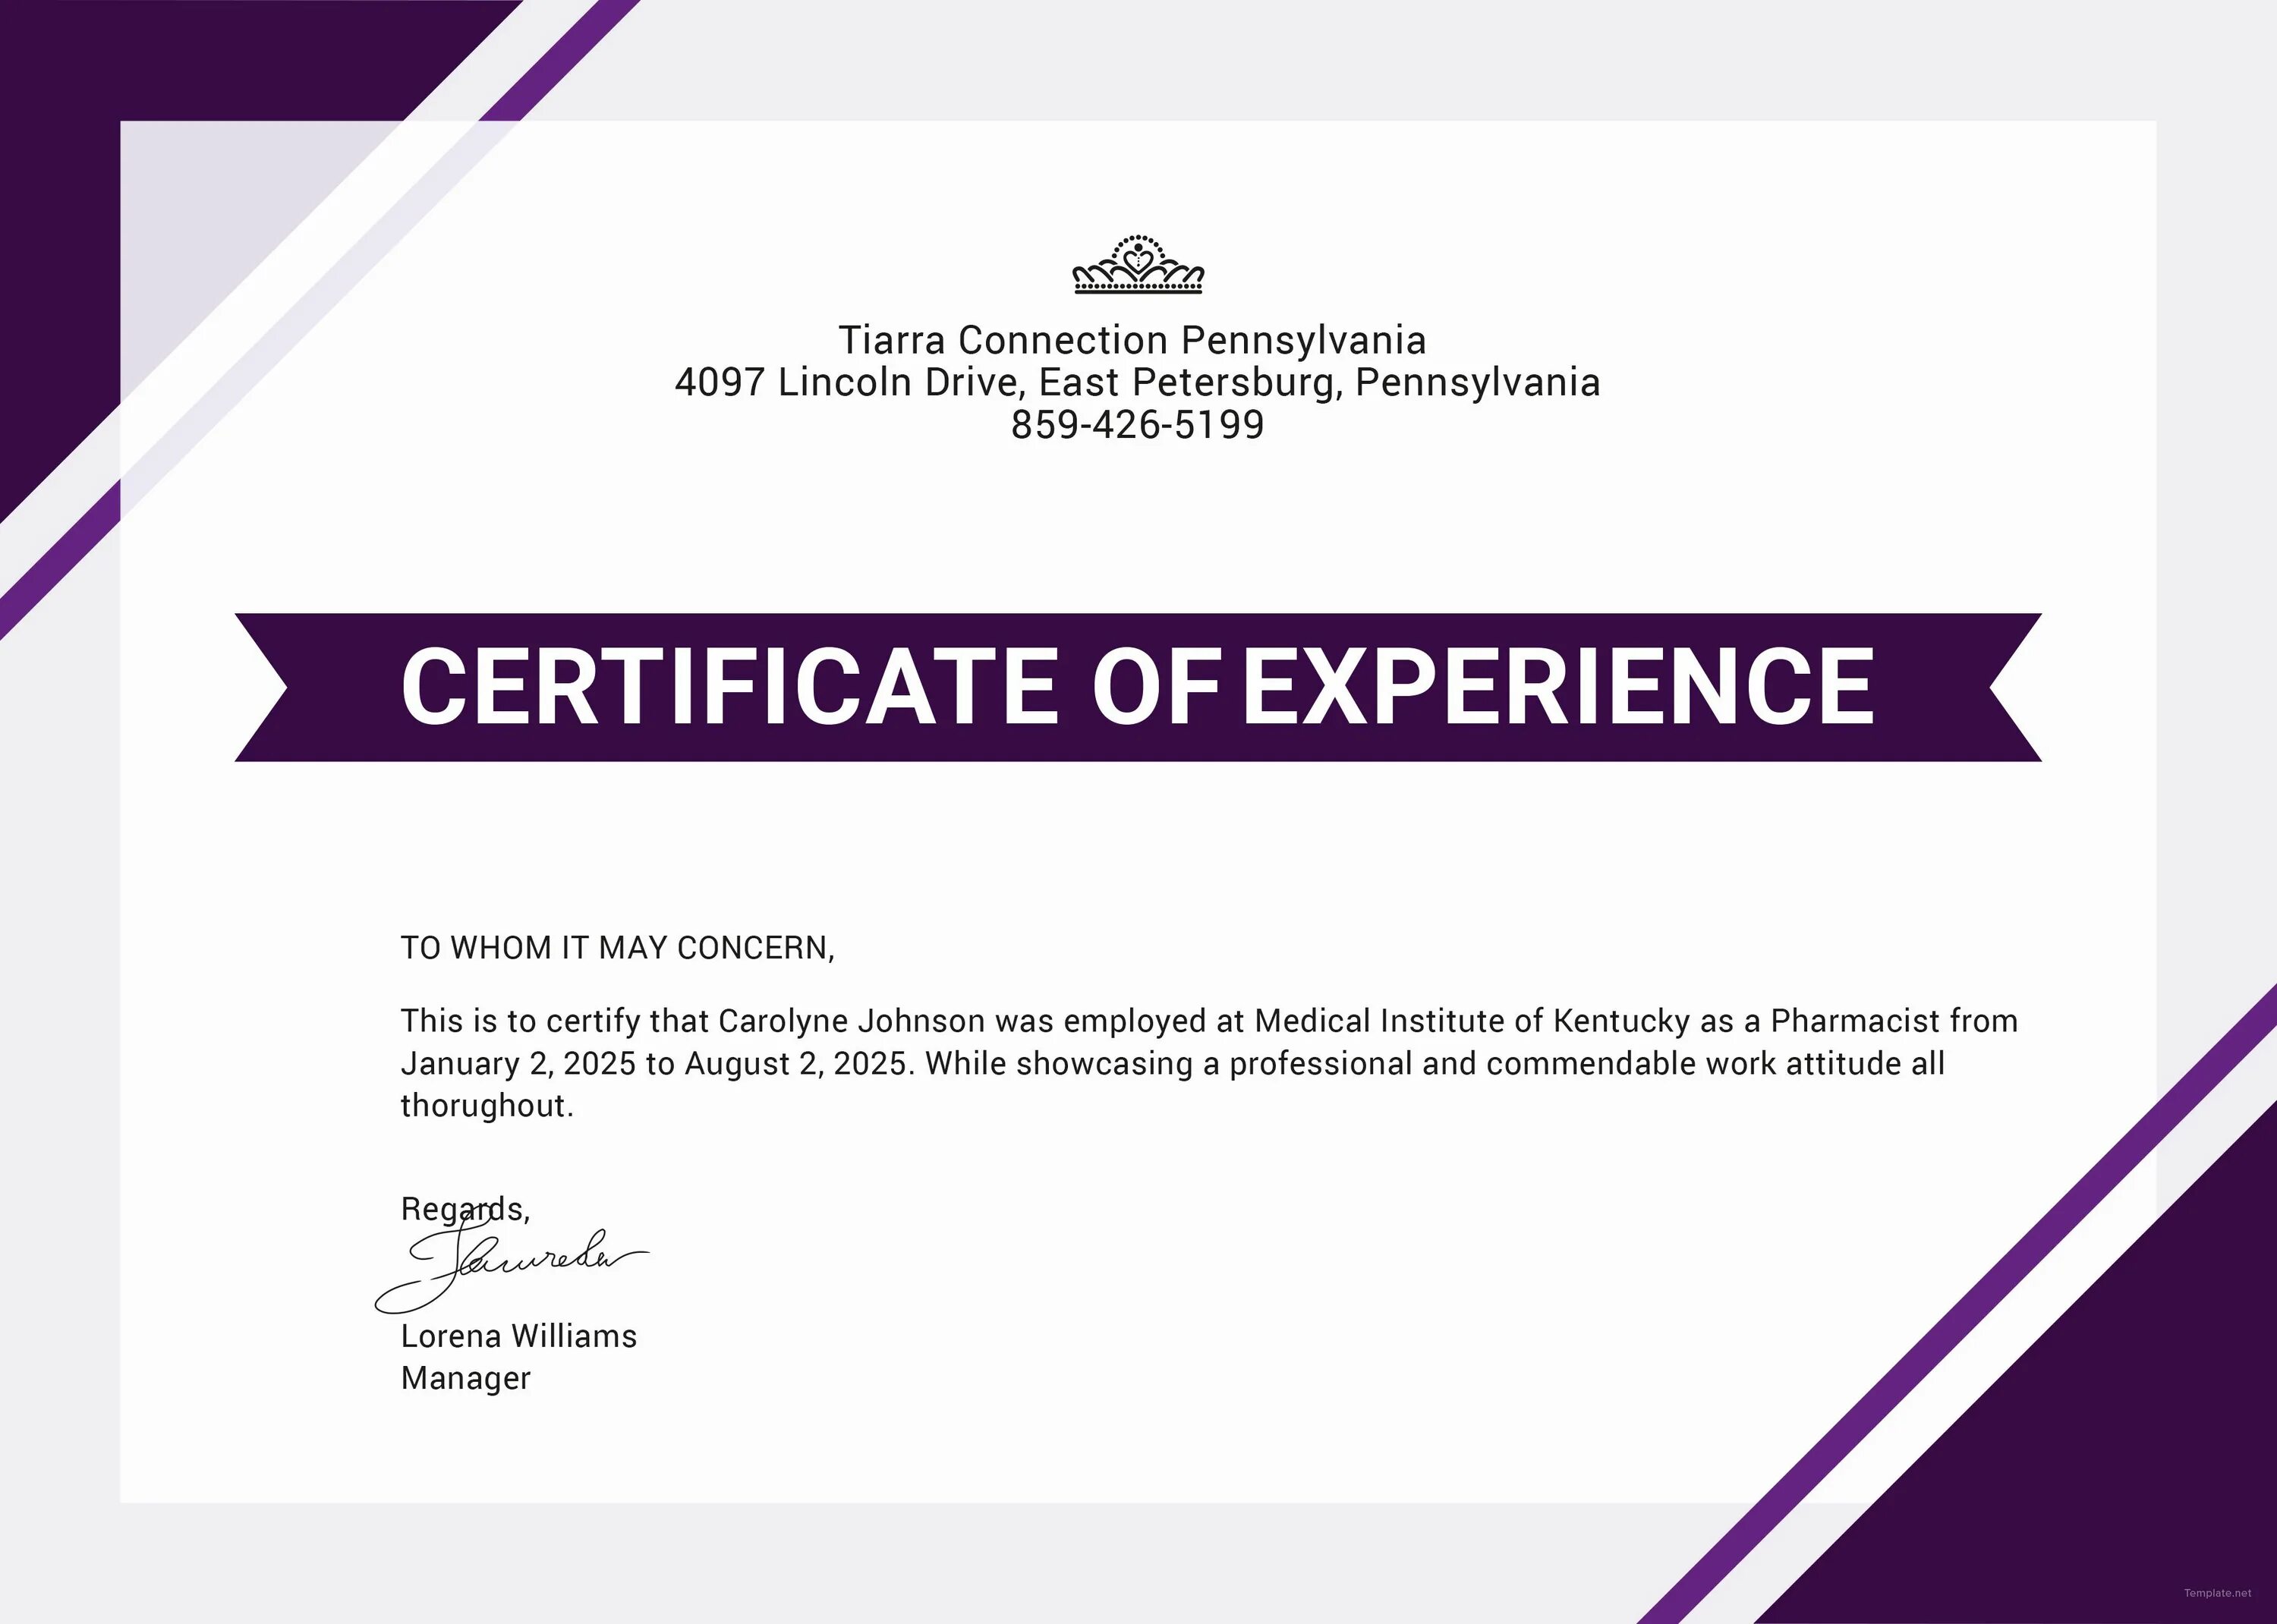 Experience Certificate. Work experience Certificate. Work experience Certificate примеры. Work experience Certificate examples.